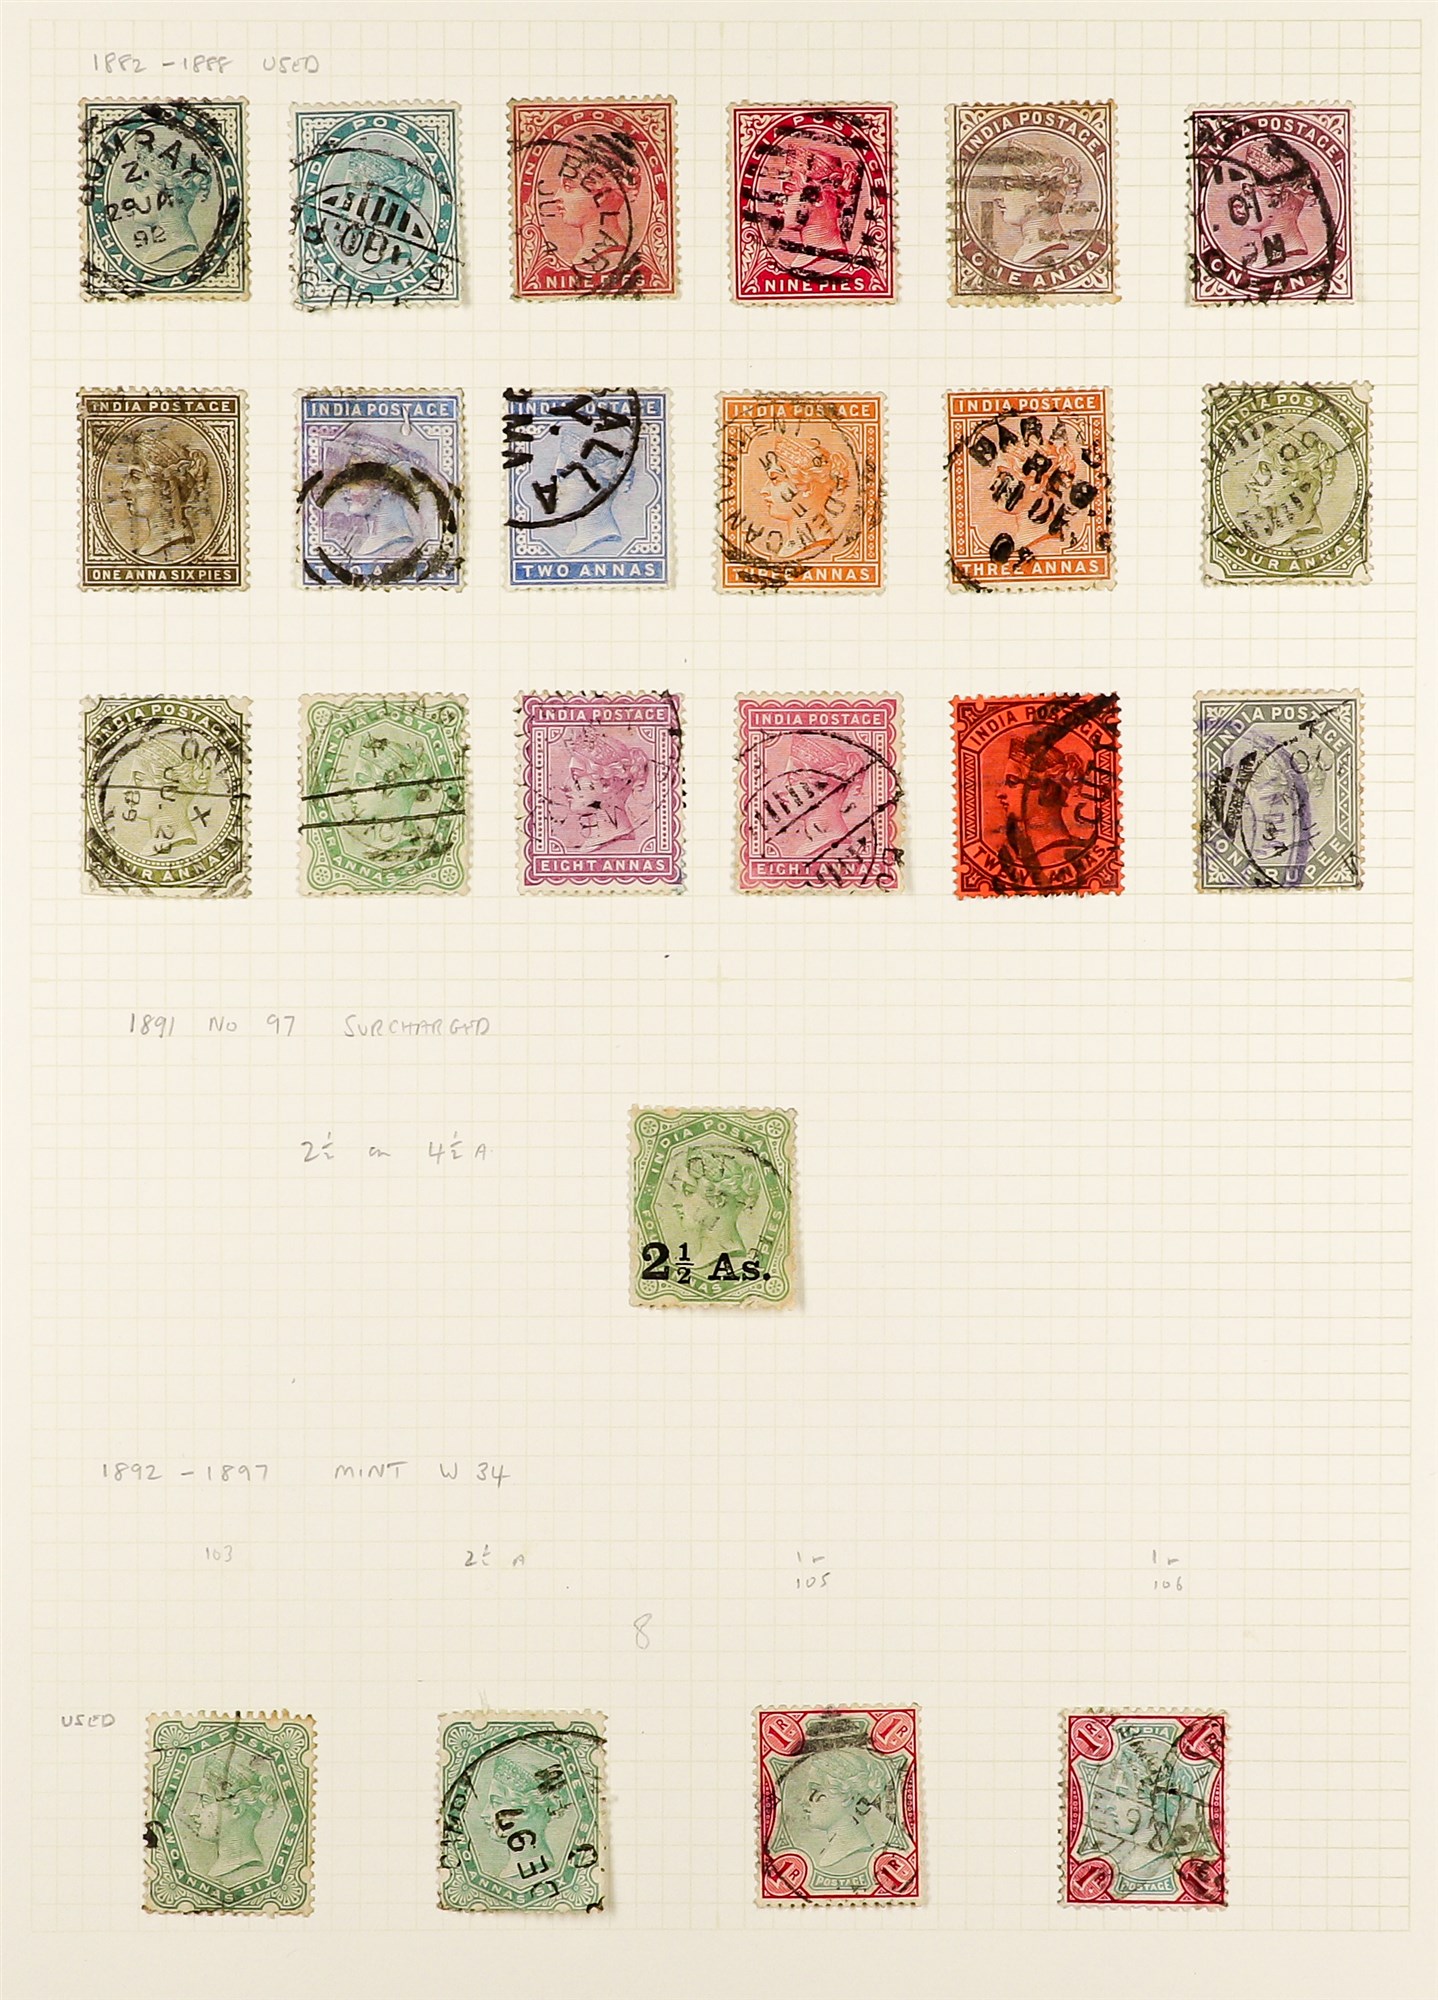 INDIA 1854 - 1952 USED COLLECTION of 400+ stamps on pages, note 1854-55 ½a (2), 1a (5), 2a (3) & 4a, - Image 5 of 27